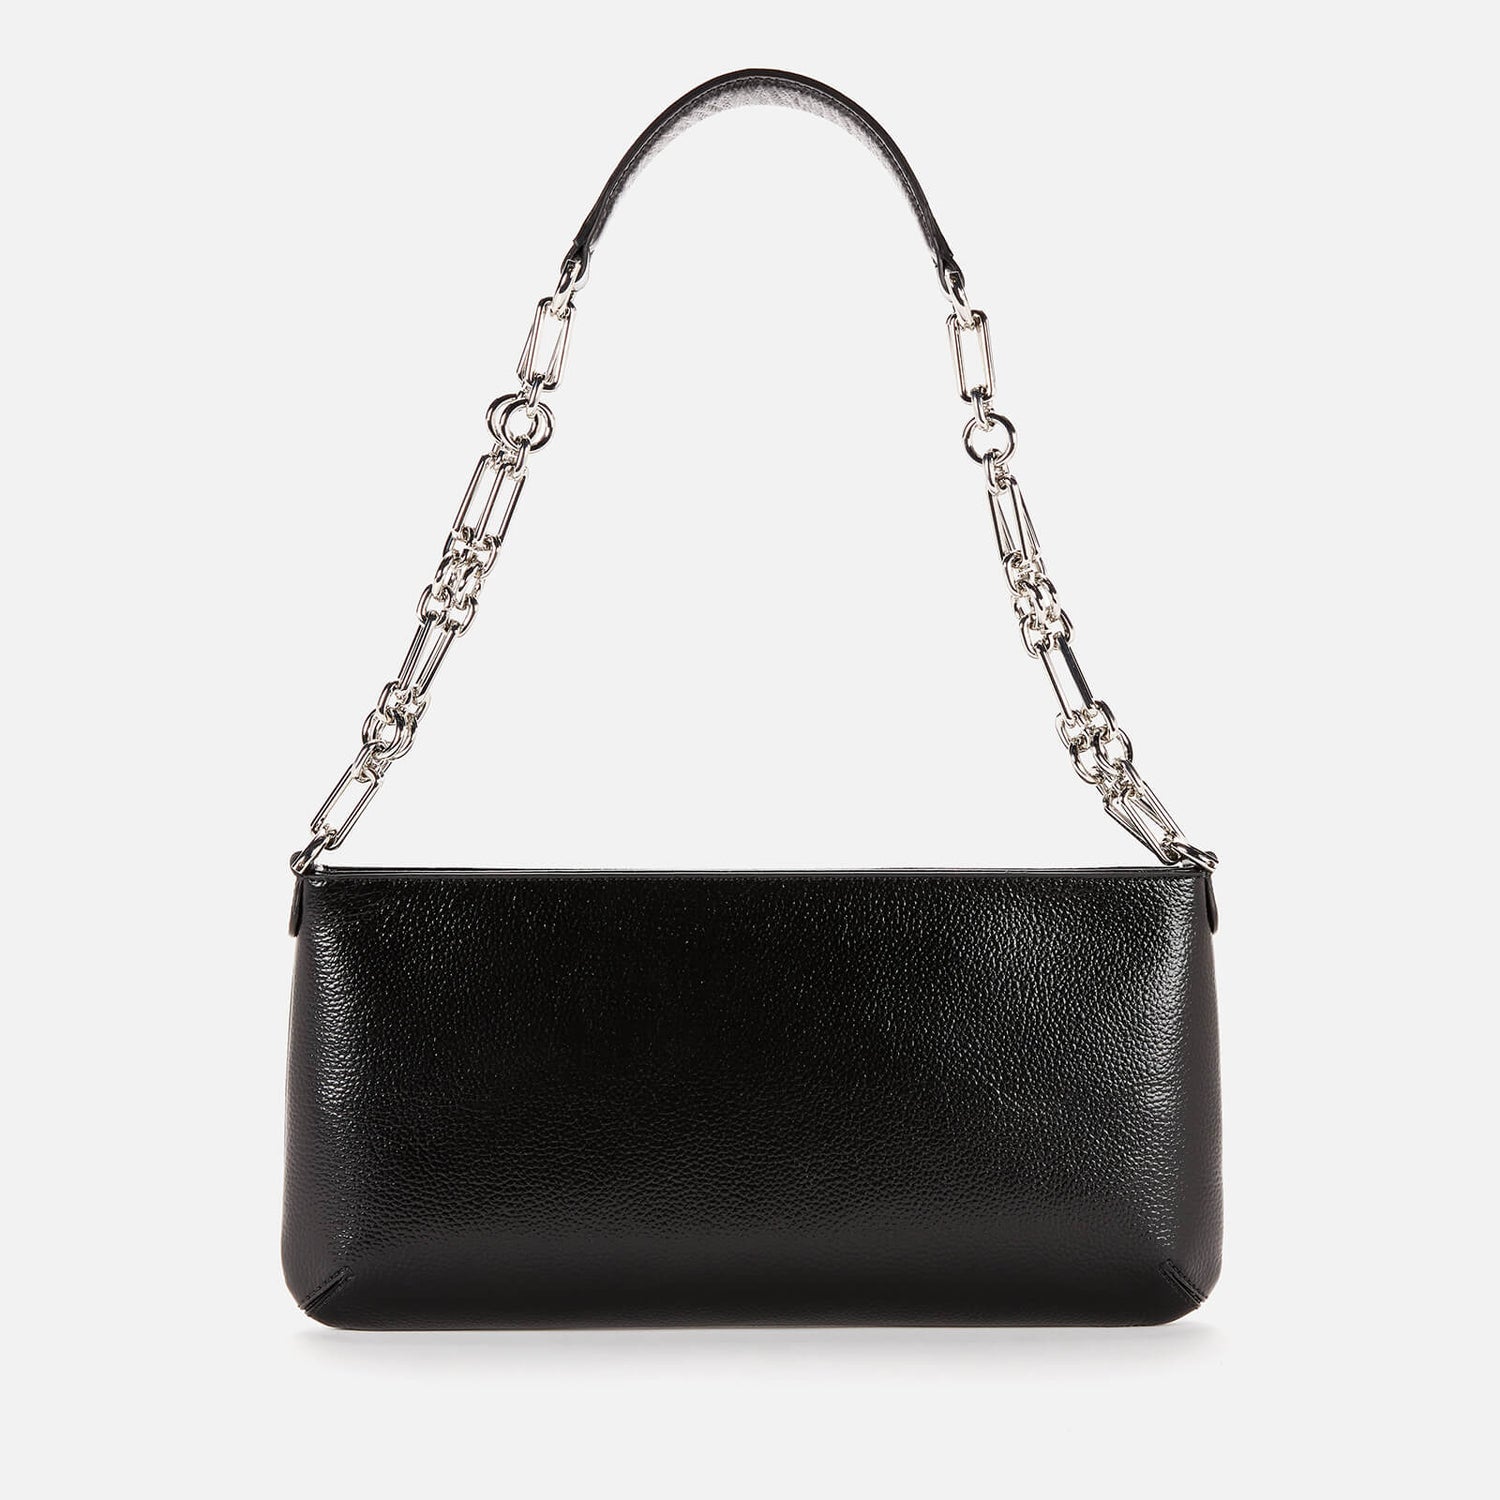 BY FAR Women's Holly Gloss Leather Bag Exclusive - Black